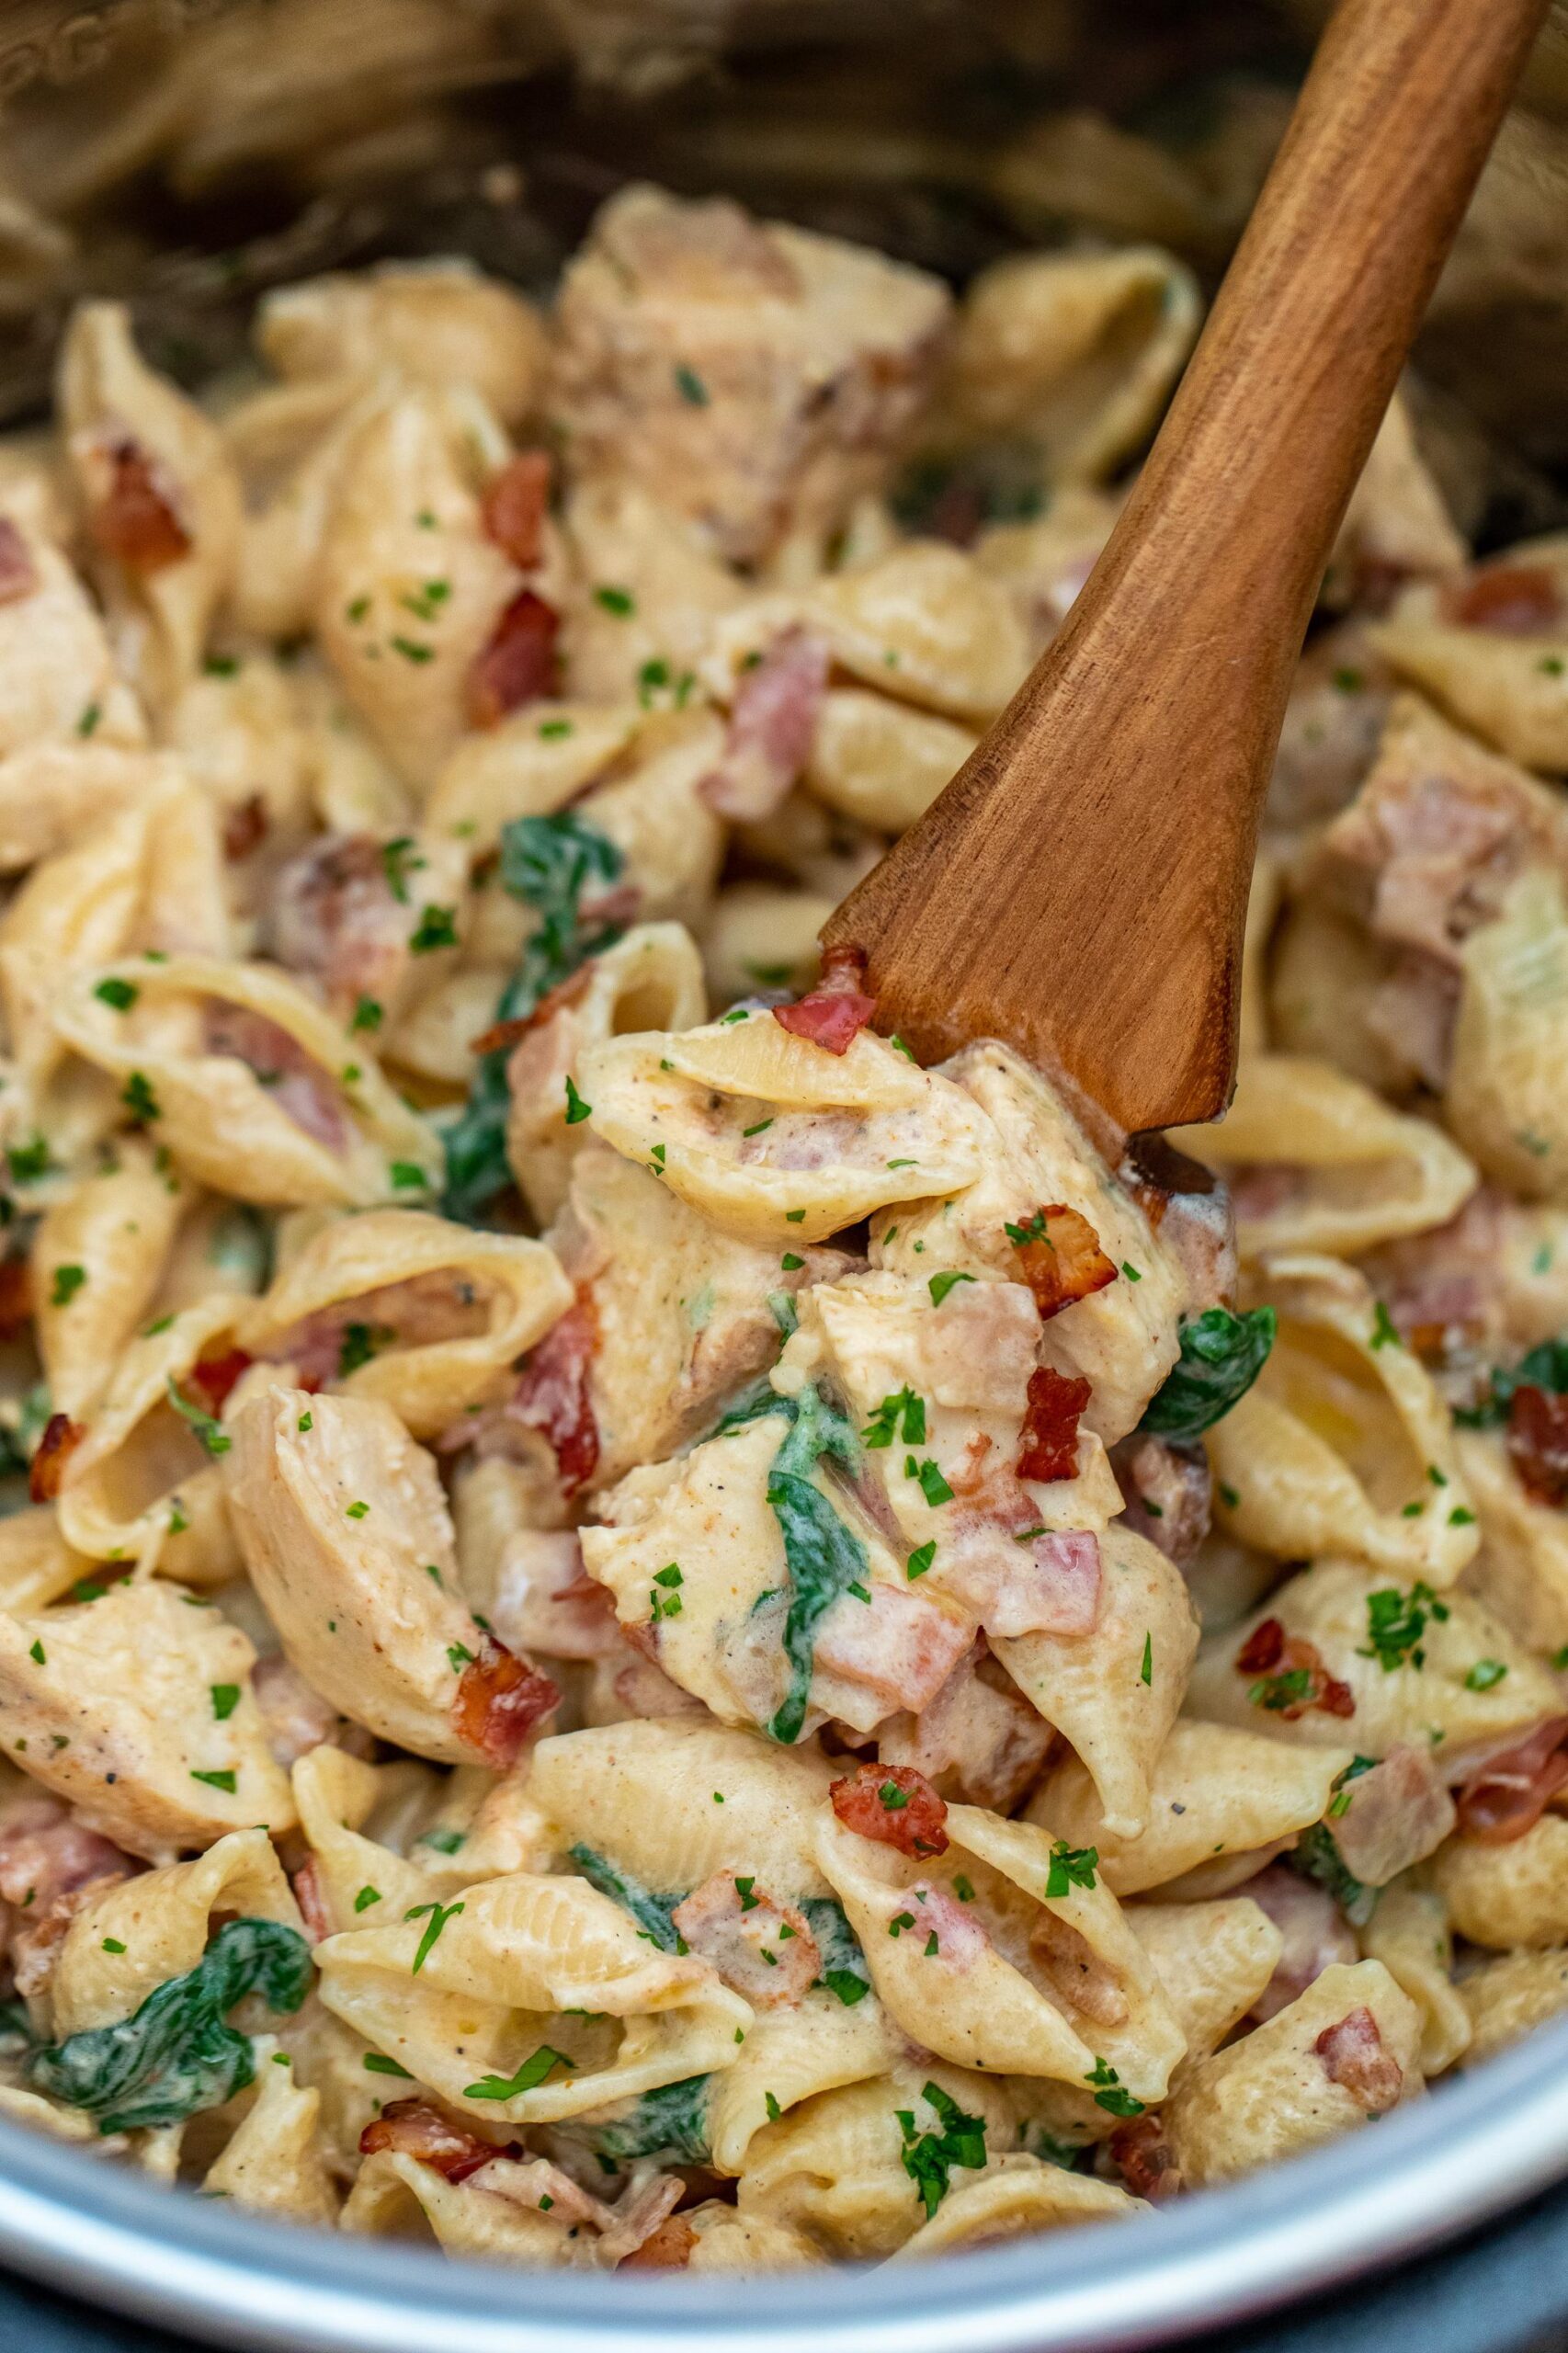  Creamy pasta with tender chicken and crispy bacon bites